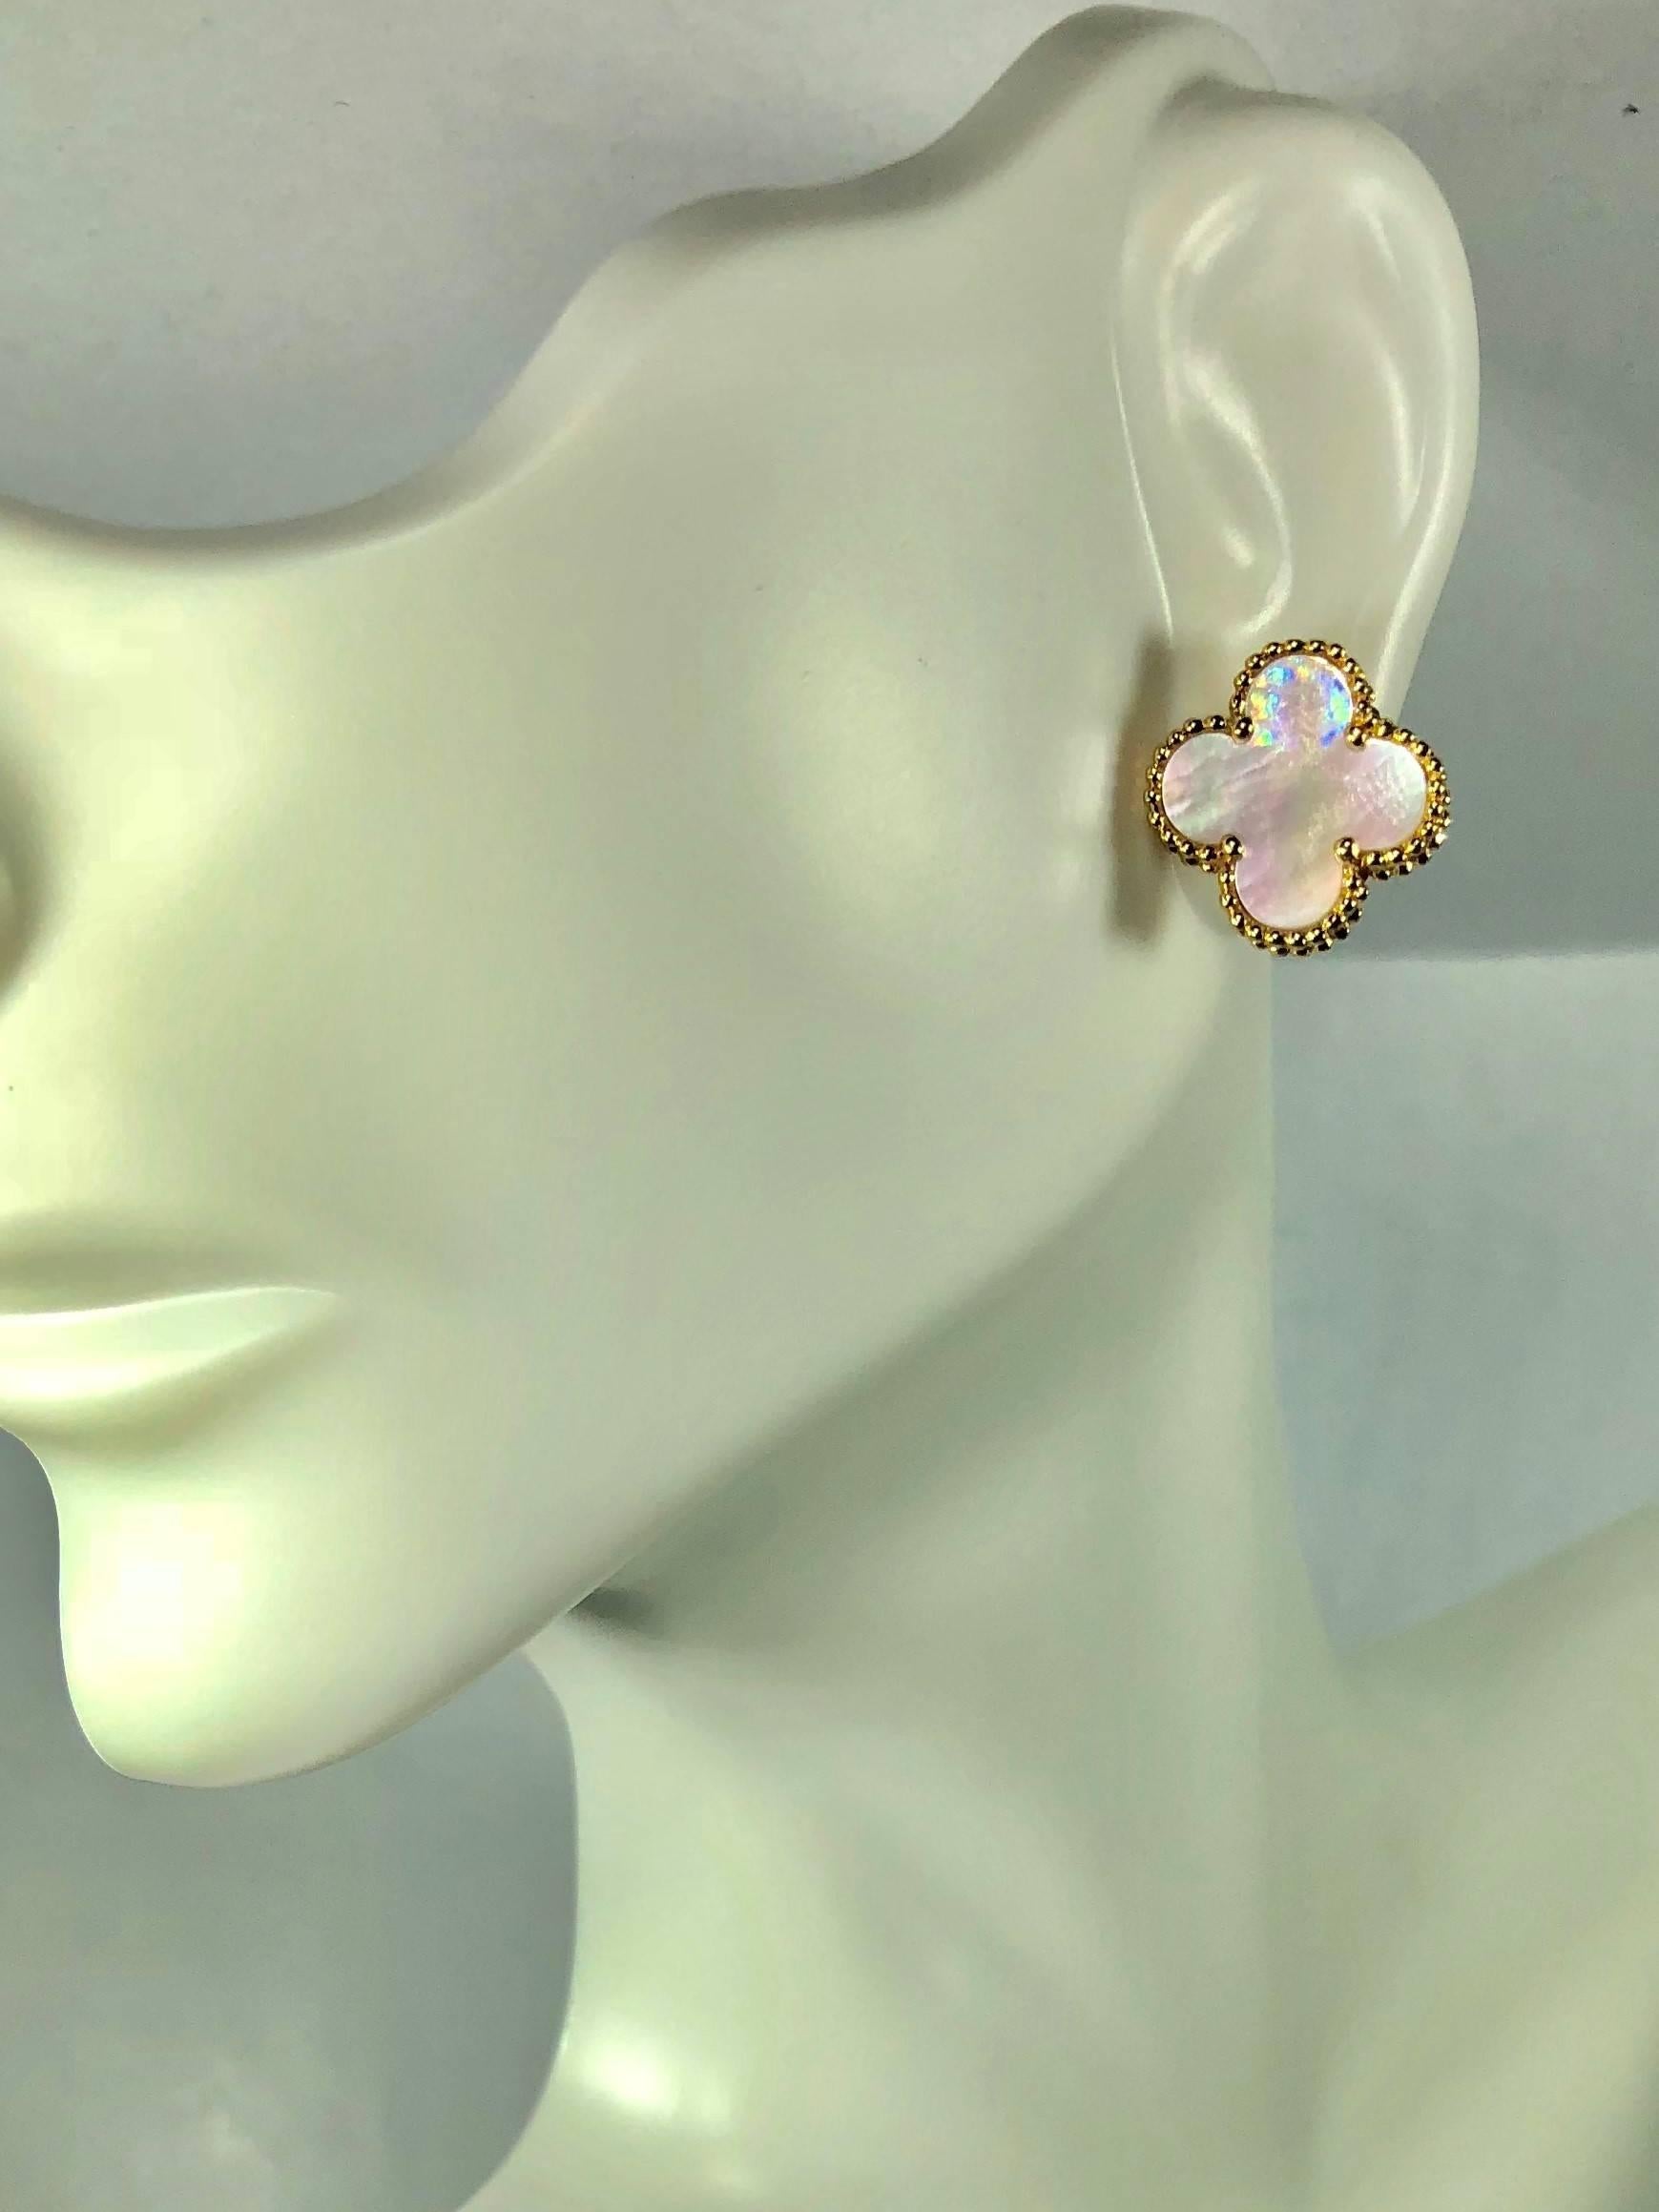 Van Cleef and Arpels Alhambra 18 karat and Mother of Pearl earrings. Alhambra collection Van Cleef and Arpels classic Mother of pearl set in 18 karat yellow gold weighing 4.2 grams,2.7dwt.. The earrings are hallmarked VCA 750, JB 067438 on the back